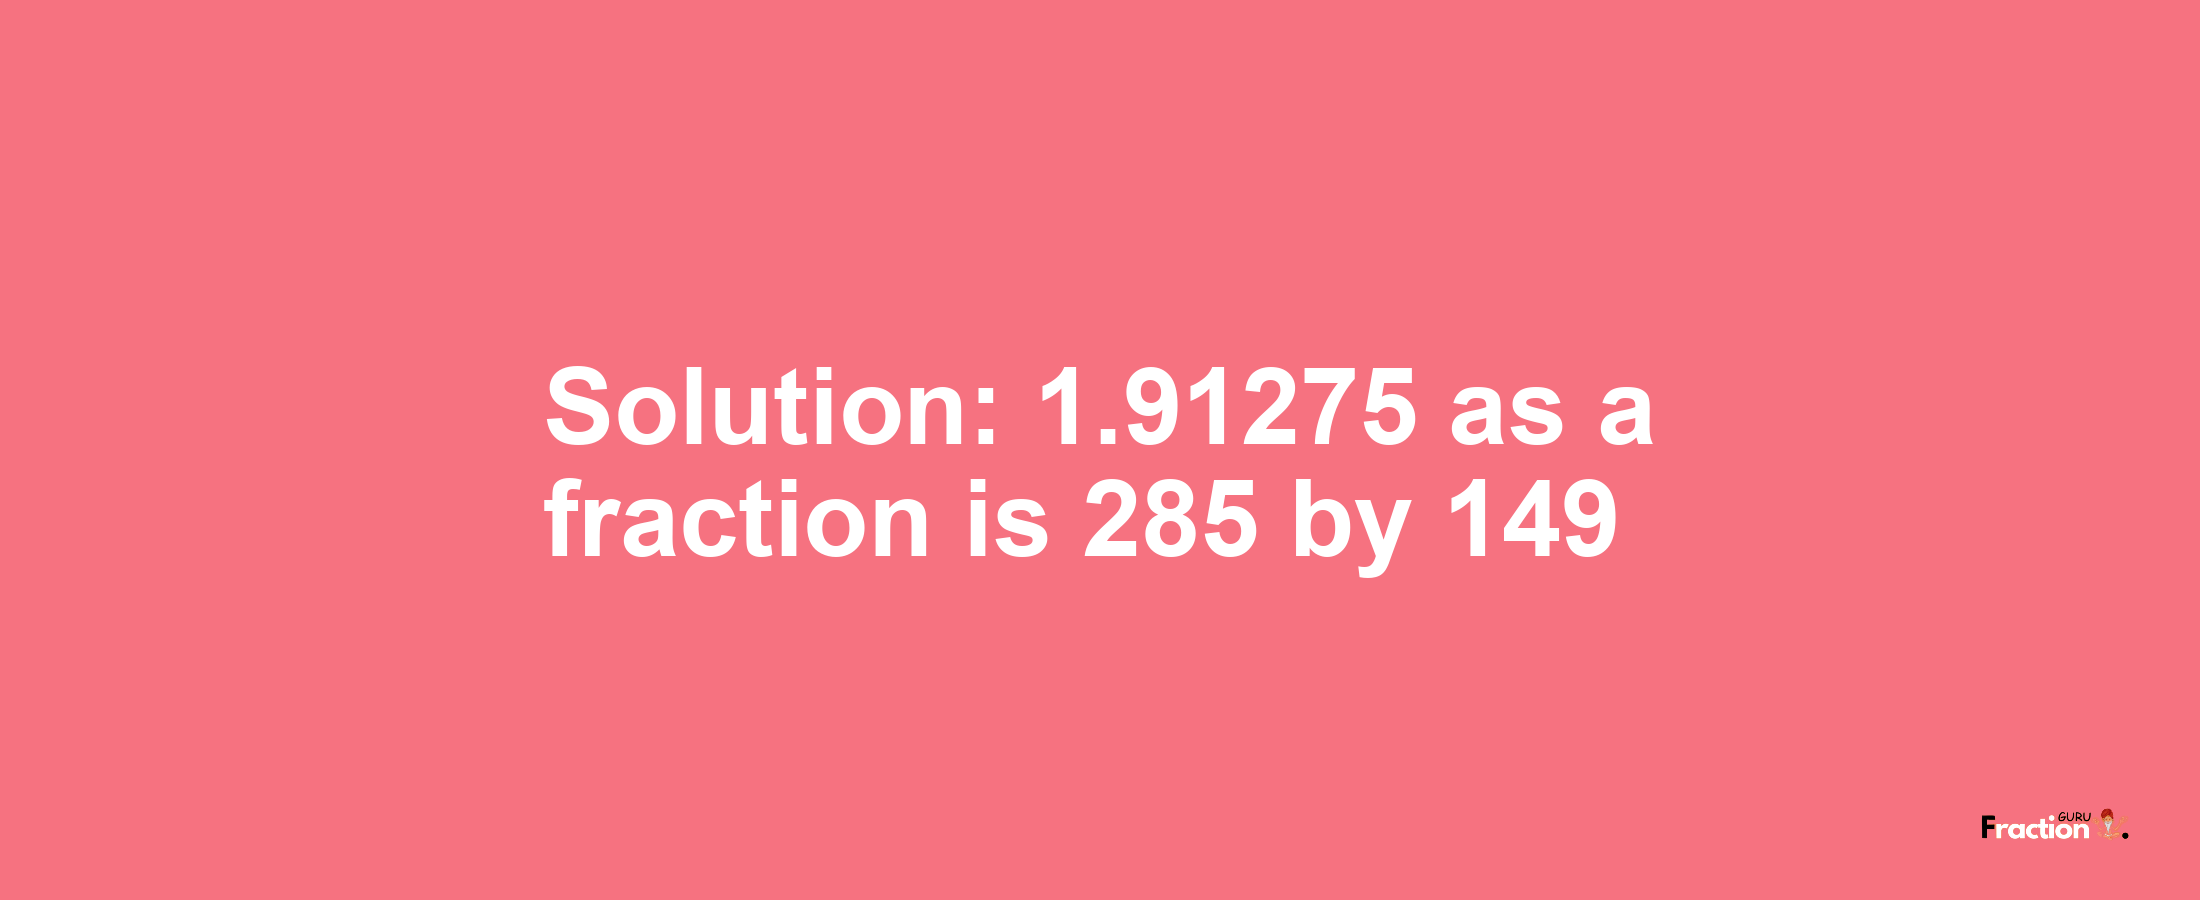 Solution:1.91275 as a fraction is 285/149